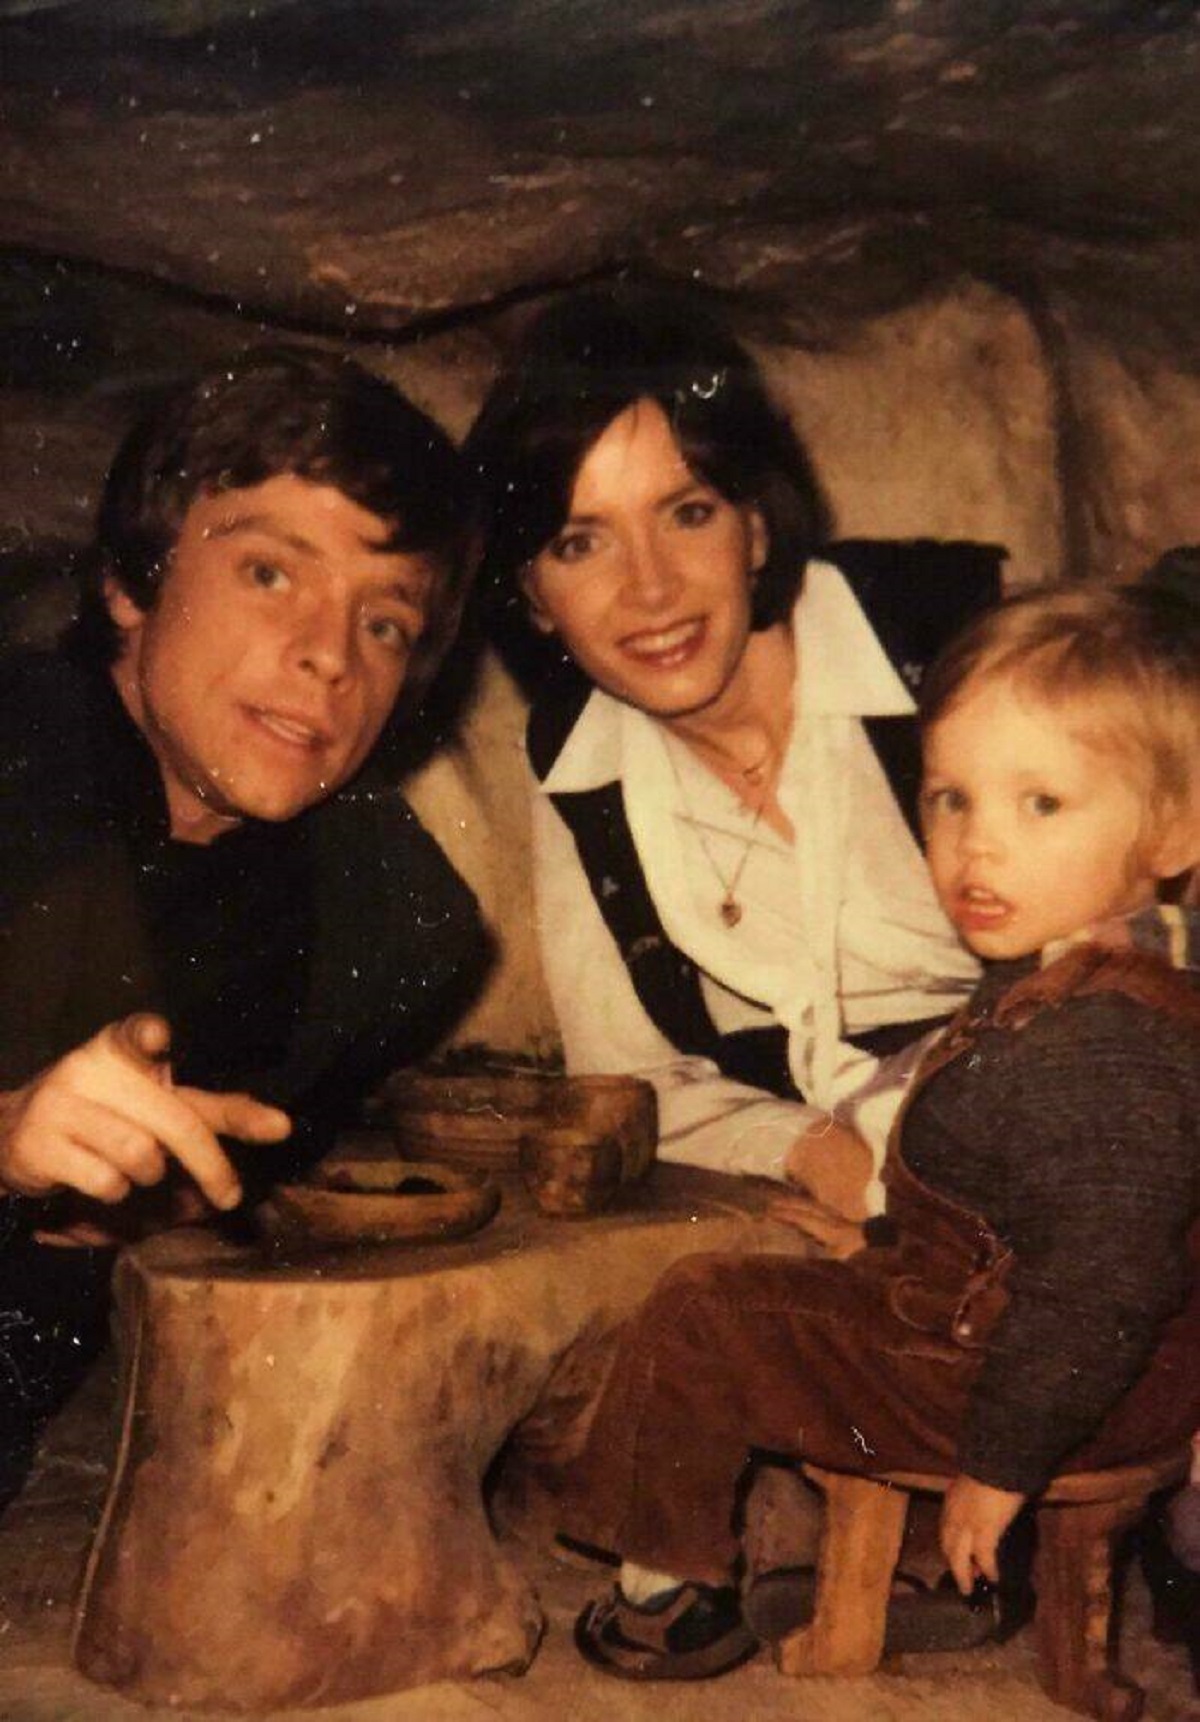 "Mark Hamill, Marilou Hamill And Their Son Nathan On The Set Of "Return Of The Jedi""